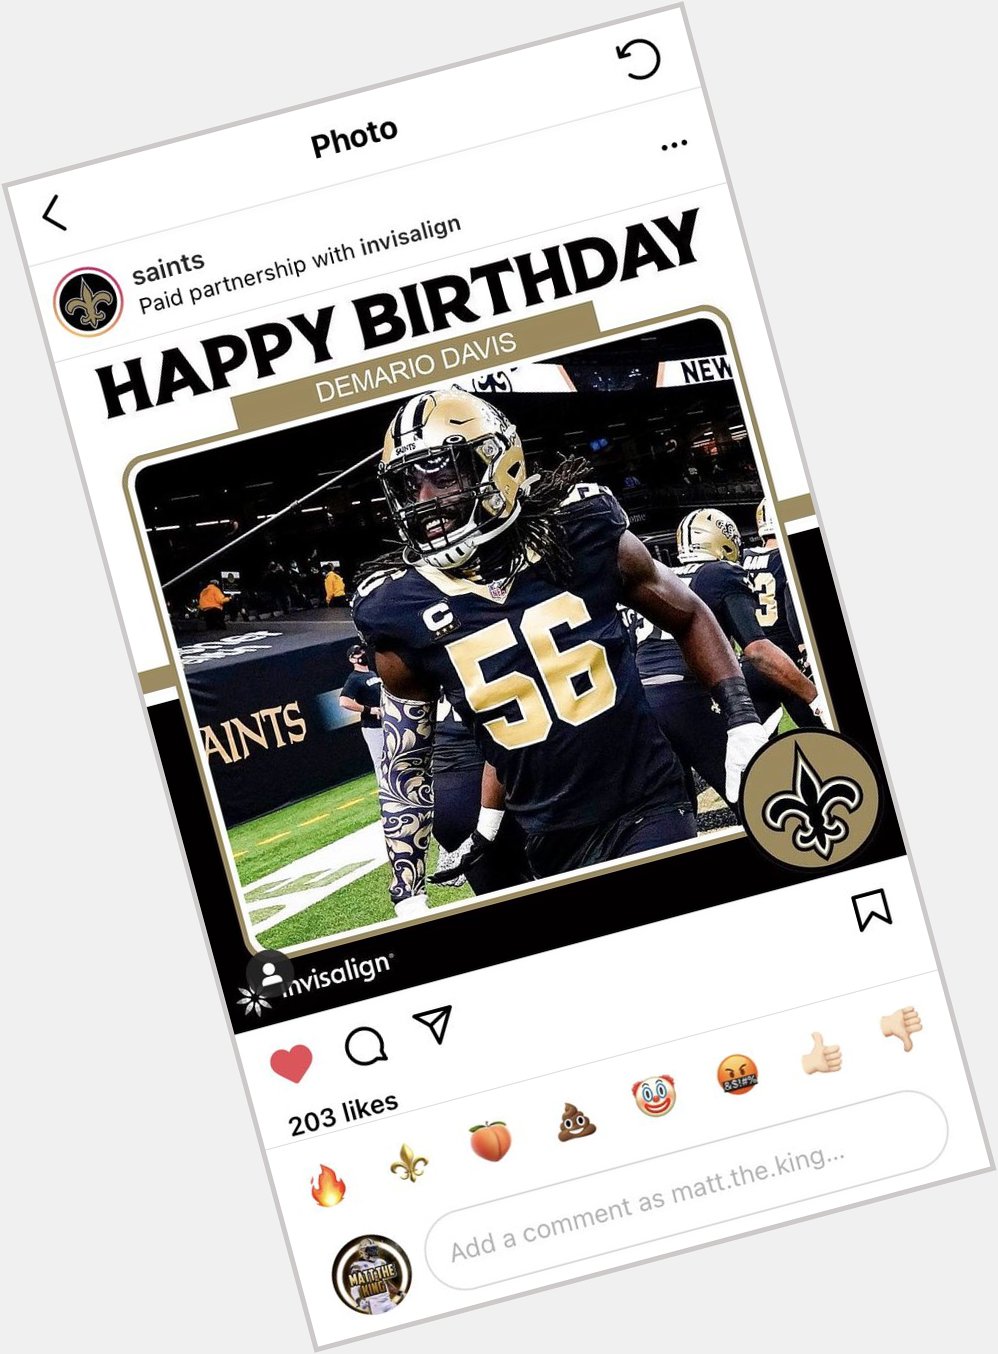  HAPPY BIRTHDAY TO THE BEST LB IN THE GAME 